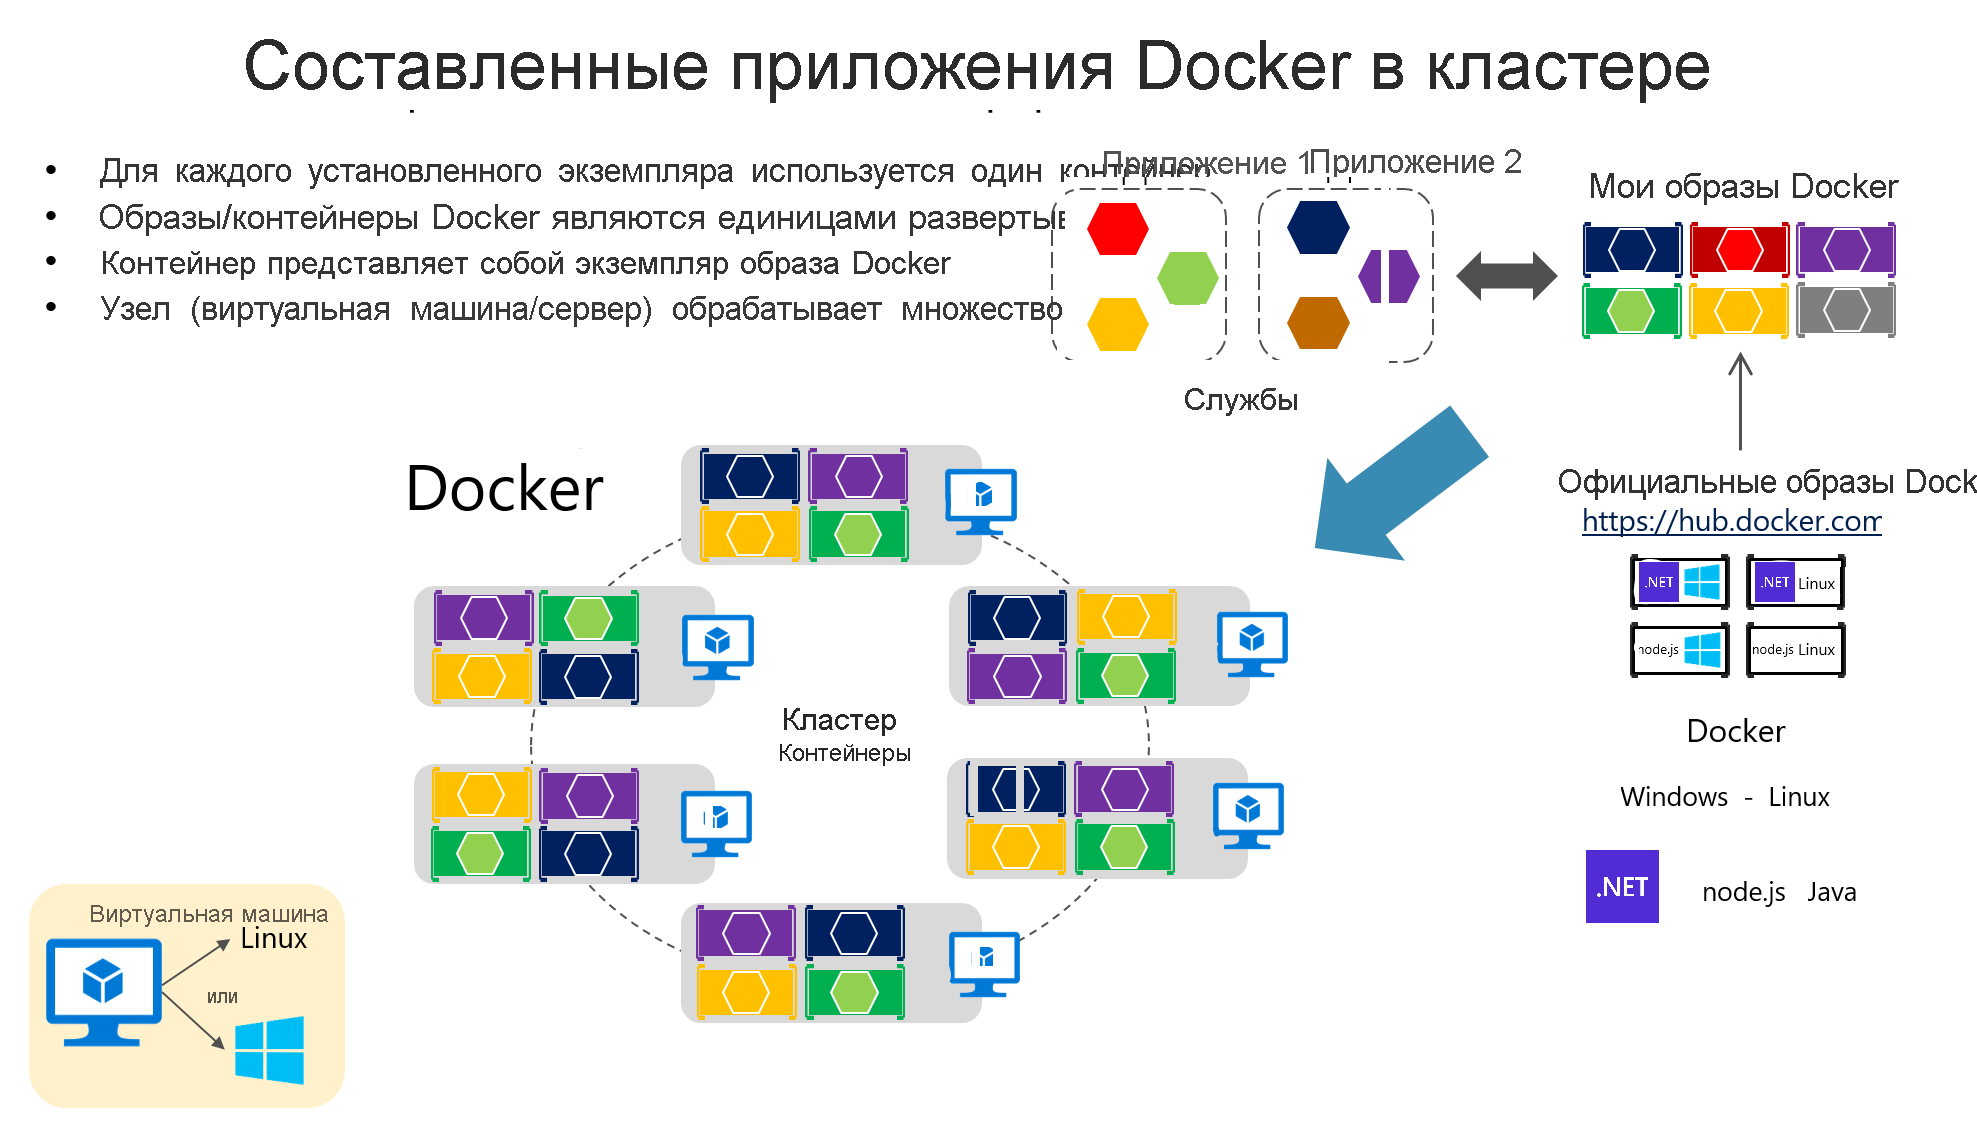 Diagram that shows Docker applications in a cluster.